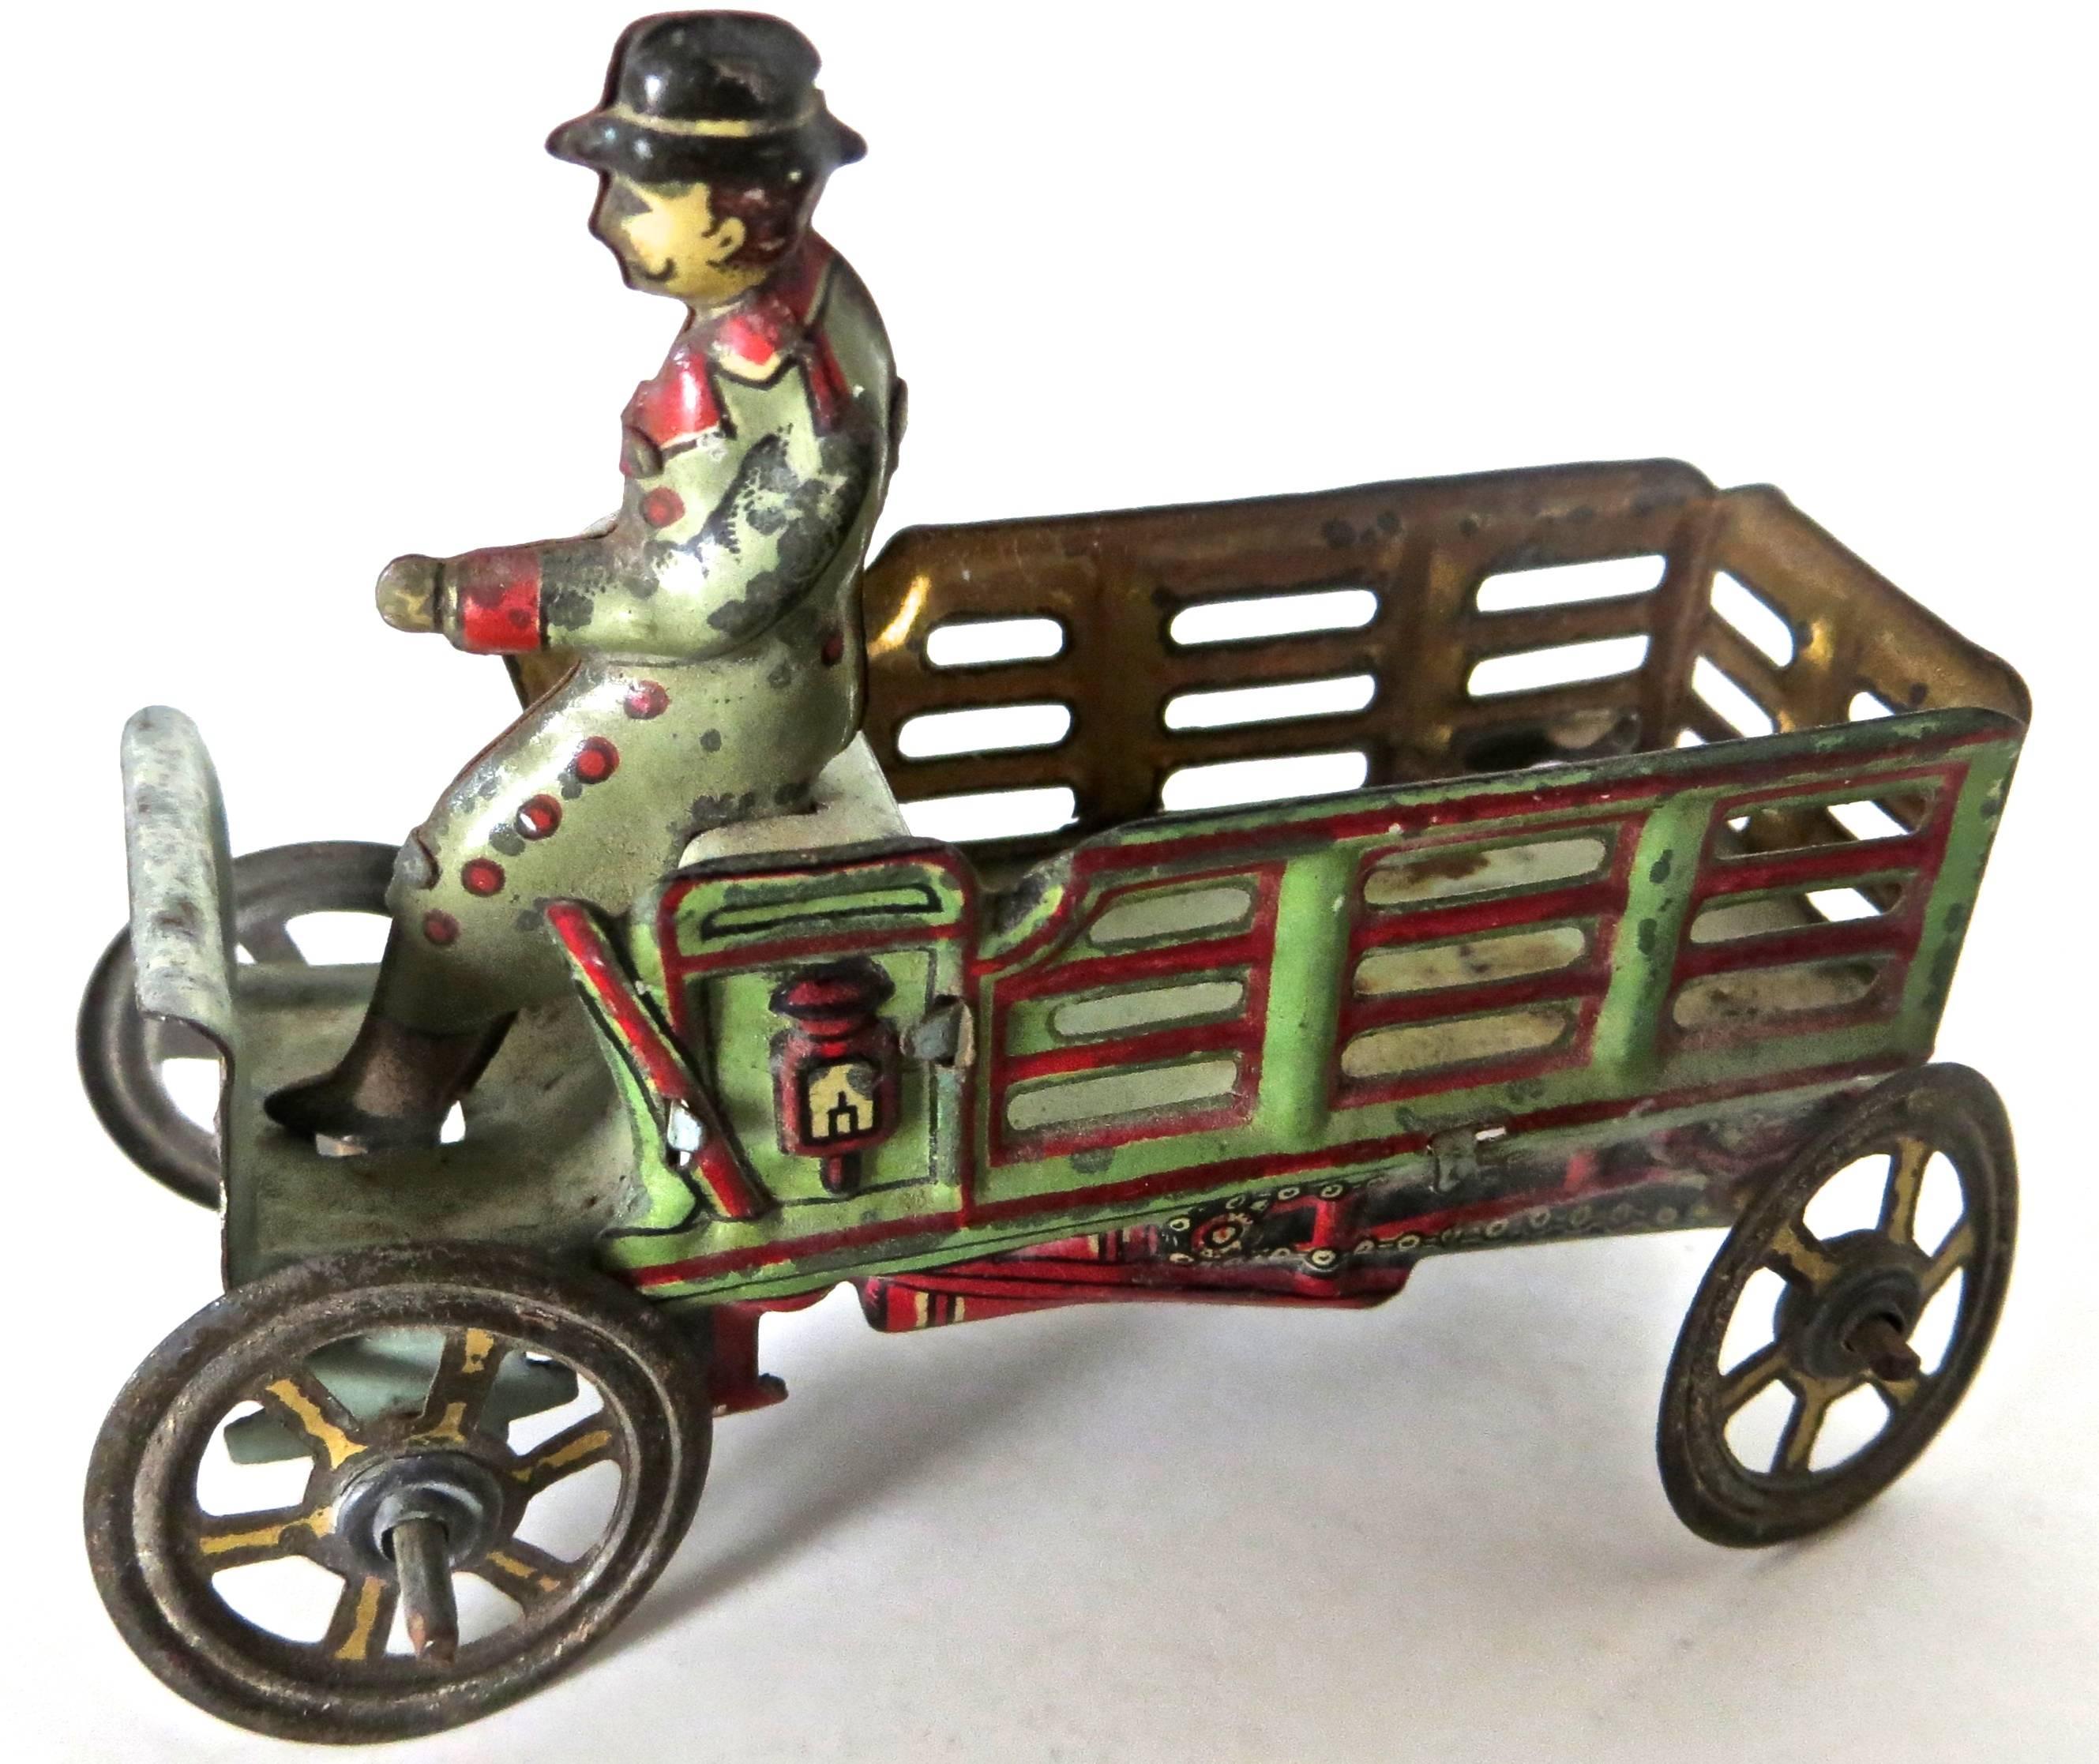 Penny toys were just that; toys made to sell for a penny or very inexpensively. This particular toy was manufactured in Nuremberg, Germany by J. Ph. Meier; made for the American market circa 1900. Penny toys were made for working class families and